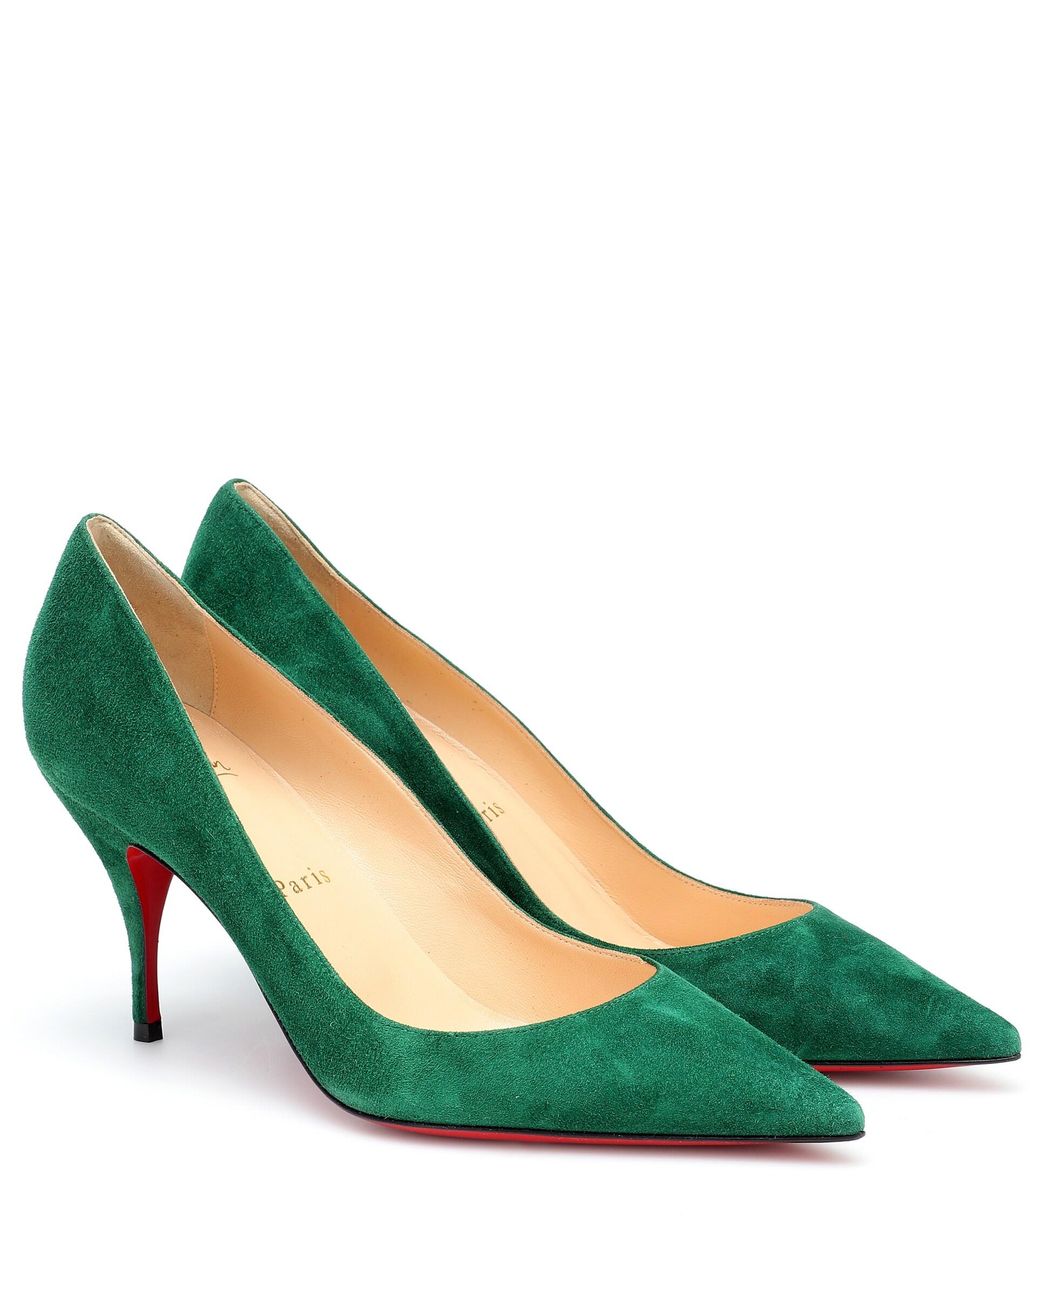 Christian Louboutin Clare 80 Suede Pumps in Green | Lyst